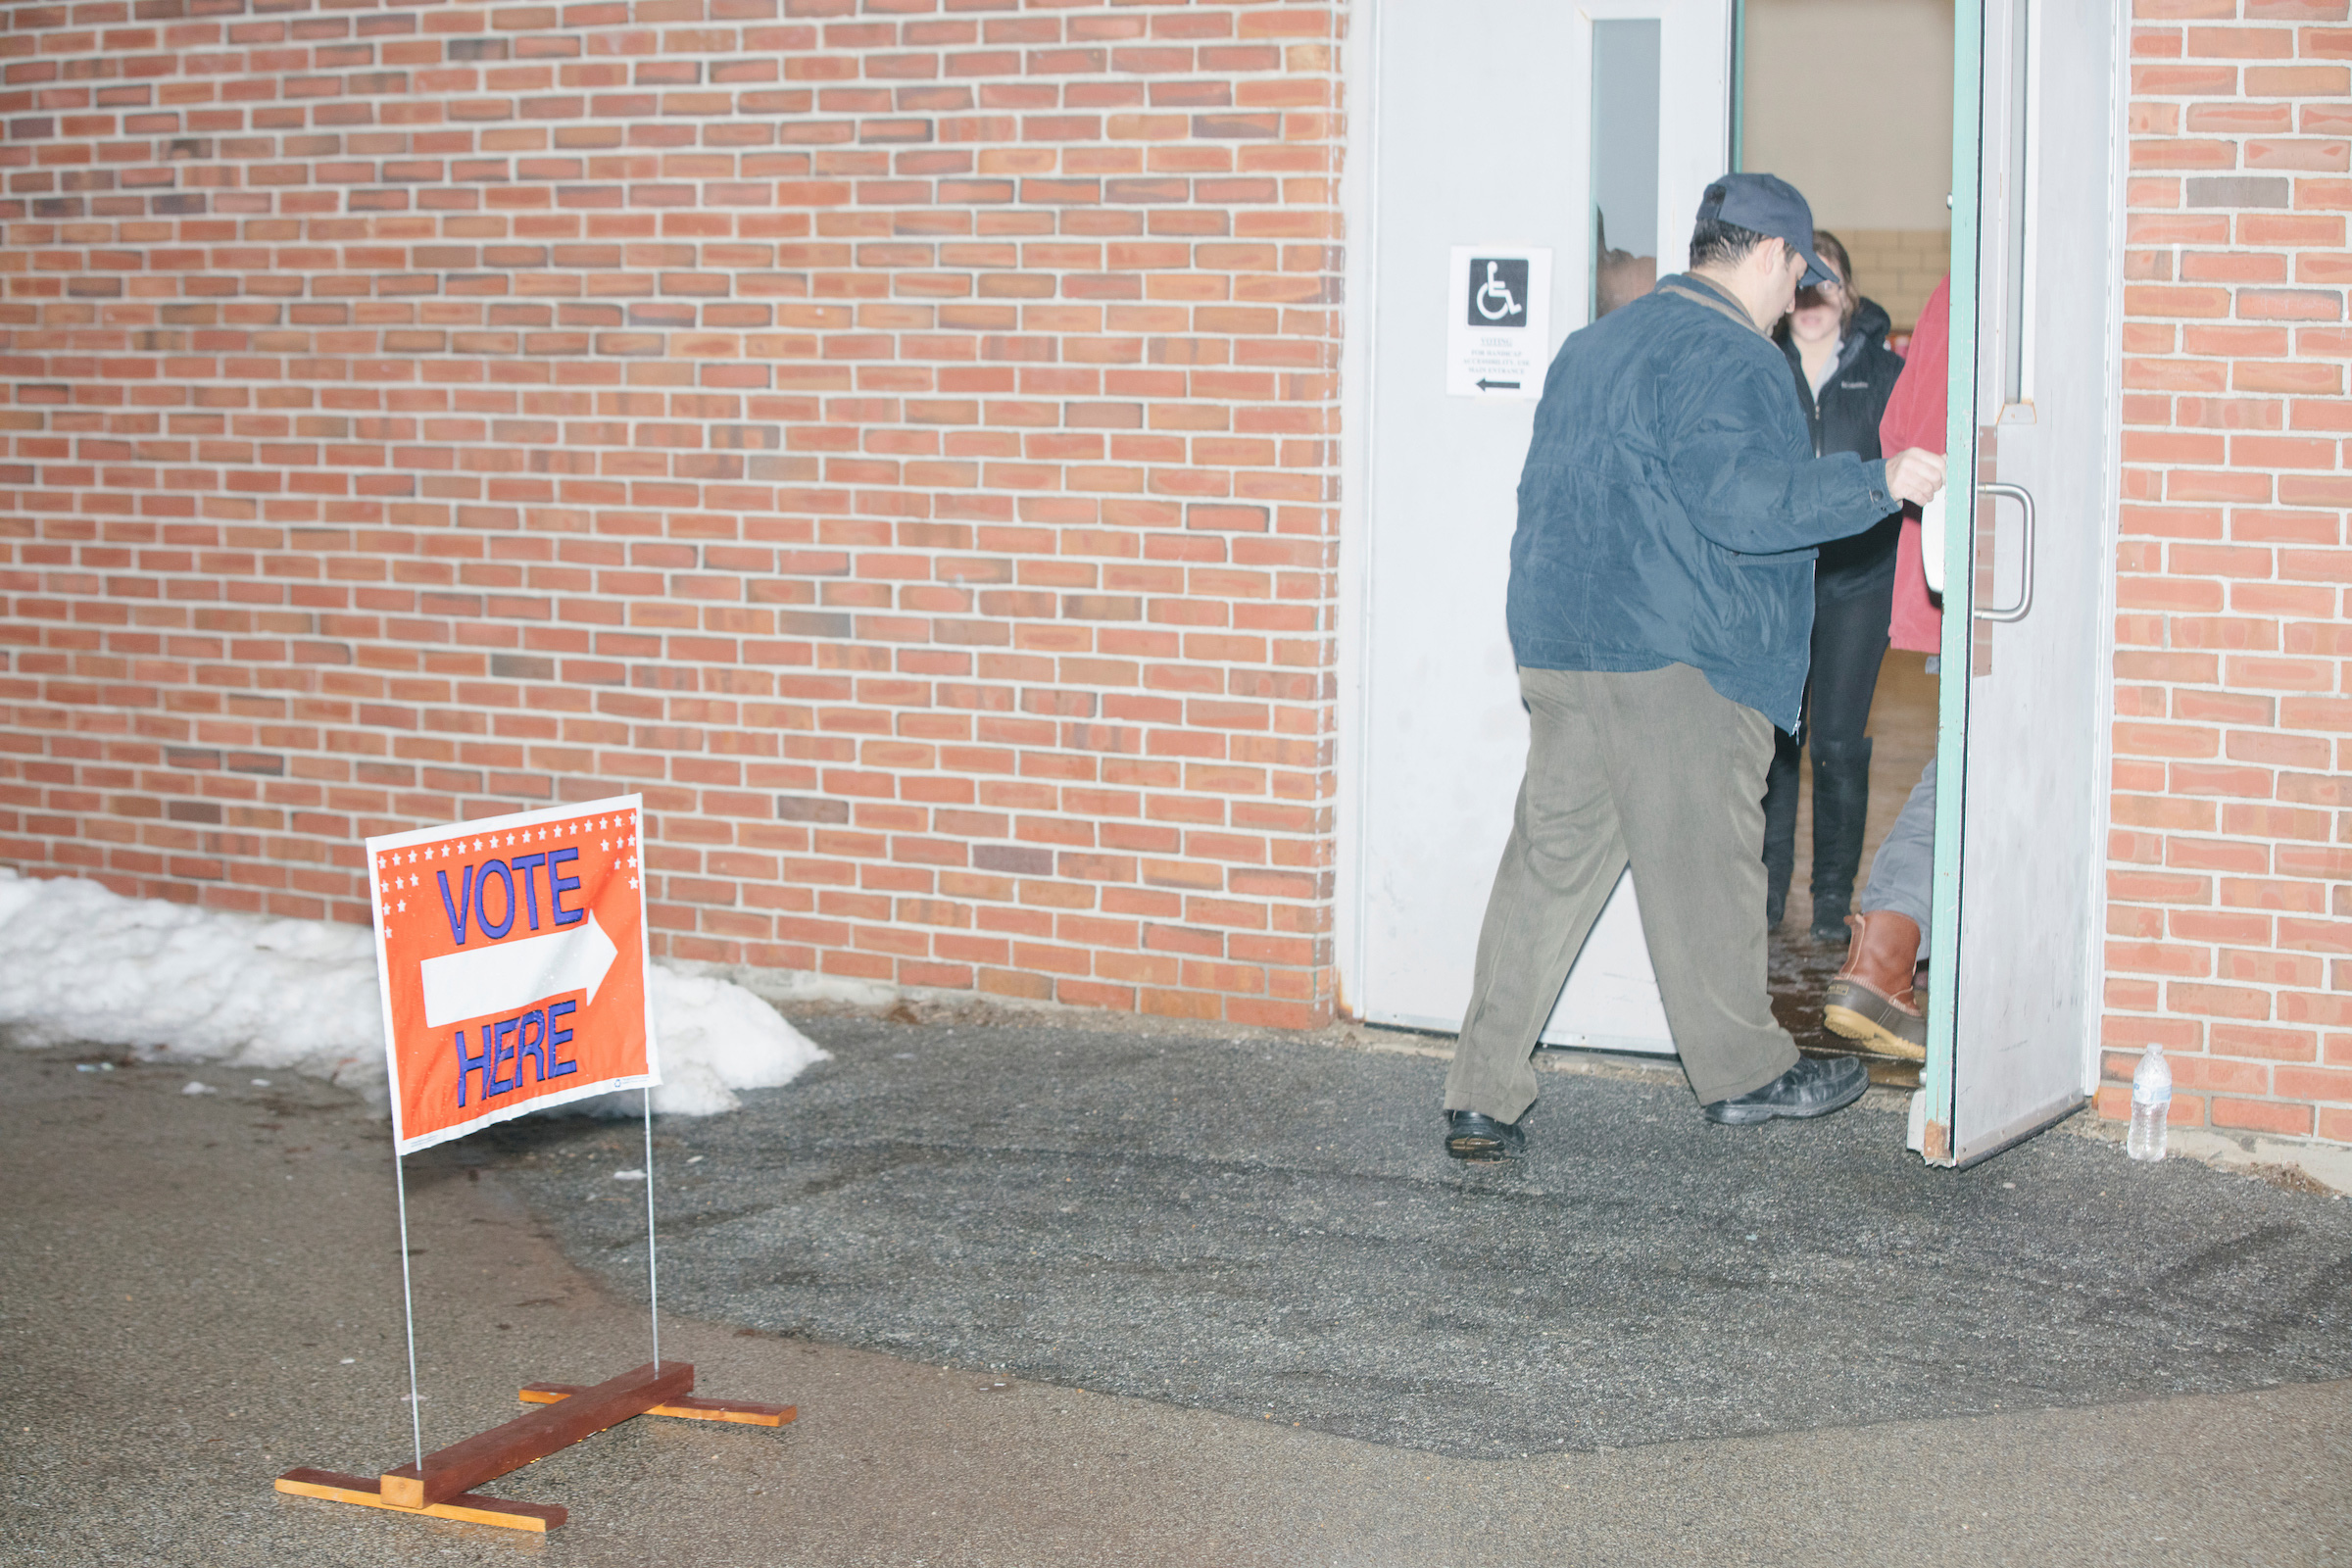 People arrive to vote in the New Hampshire Presidential Primary at Fair Grounds Junior High School in Nashua, N.H., on Feb. 11, 2020. (M. Scott Brauer for TIME)